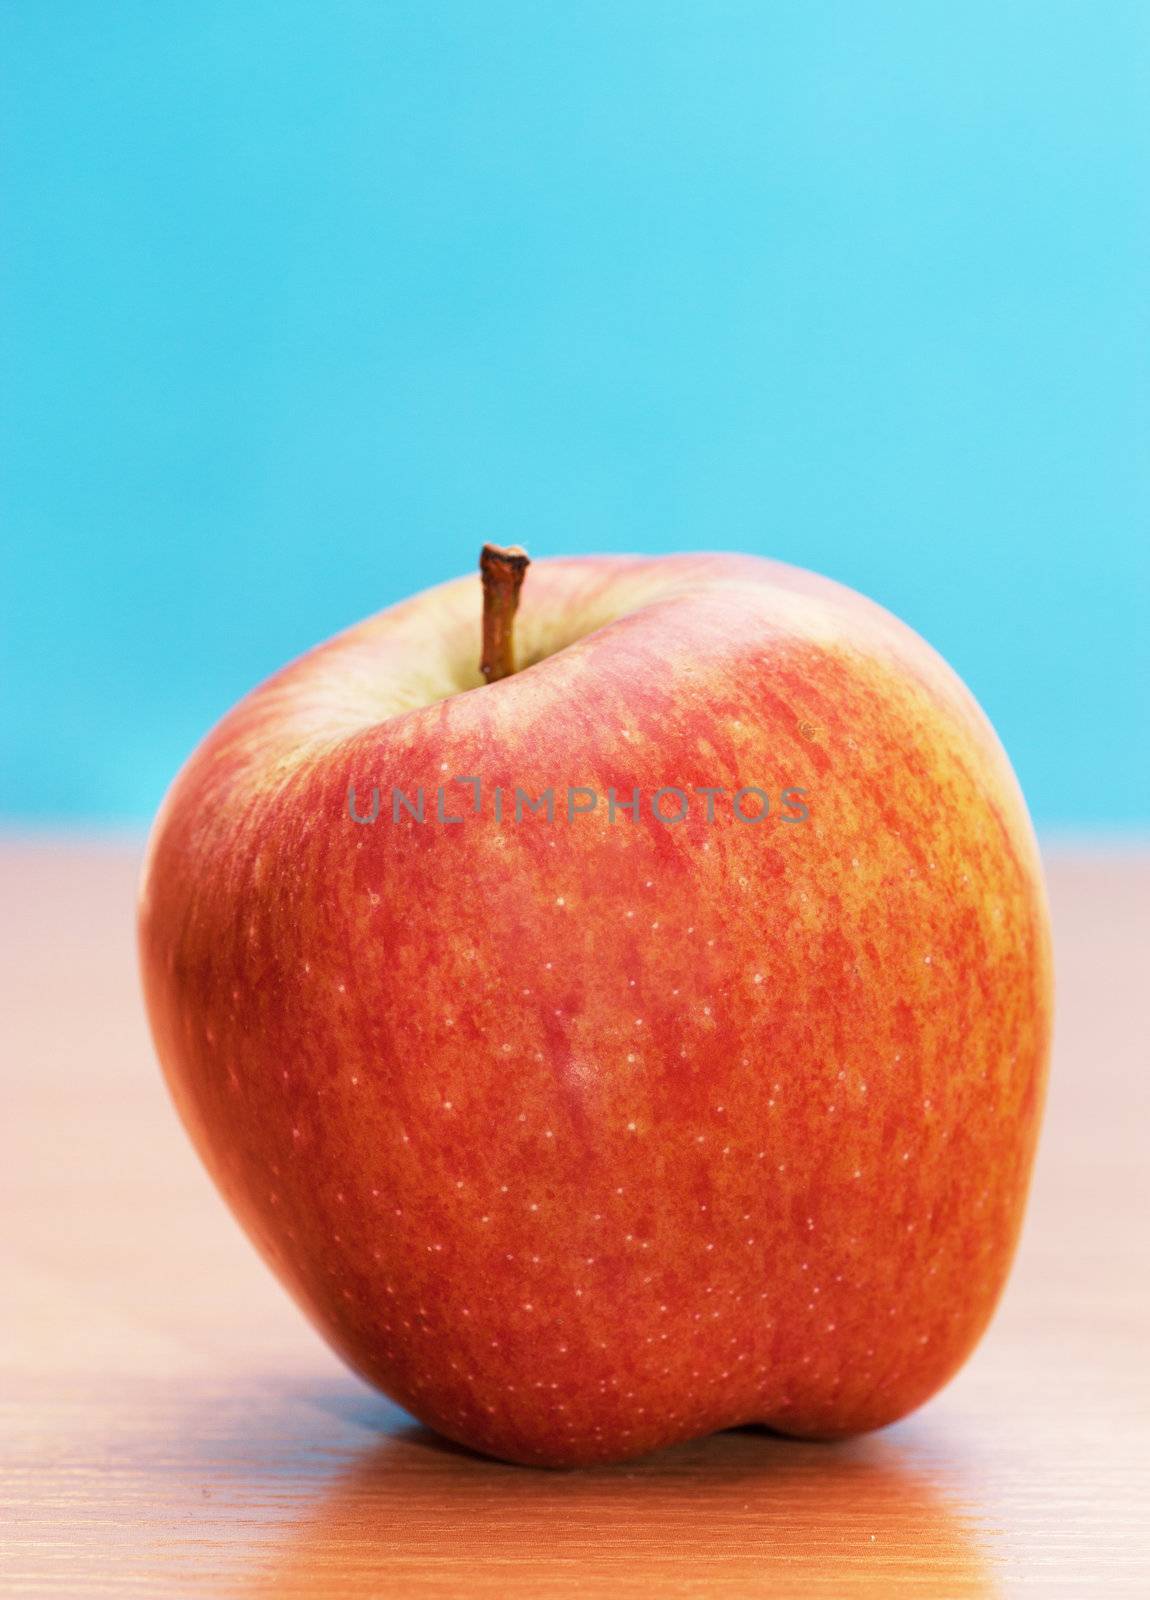 Big red apple on a table over blue background